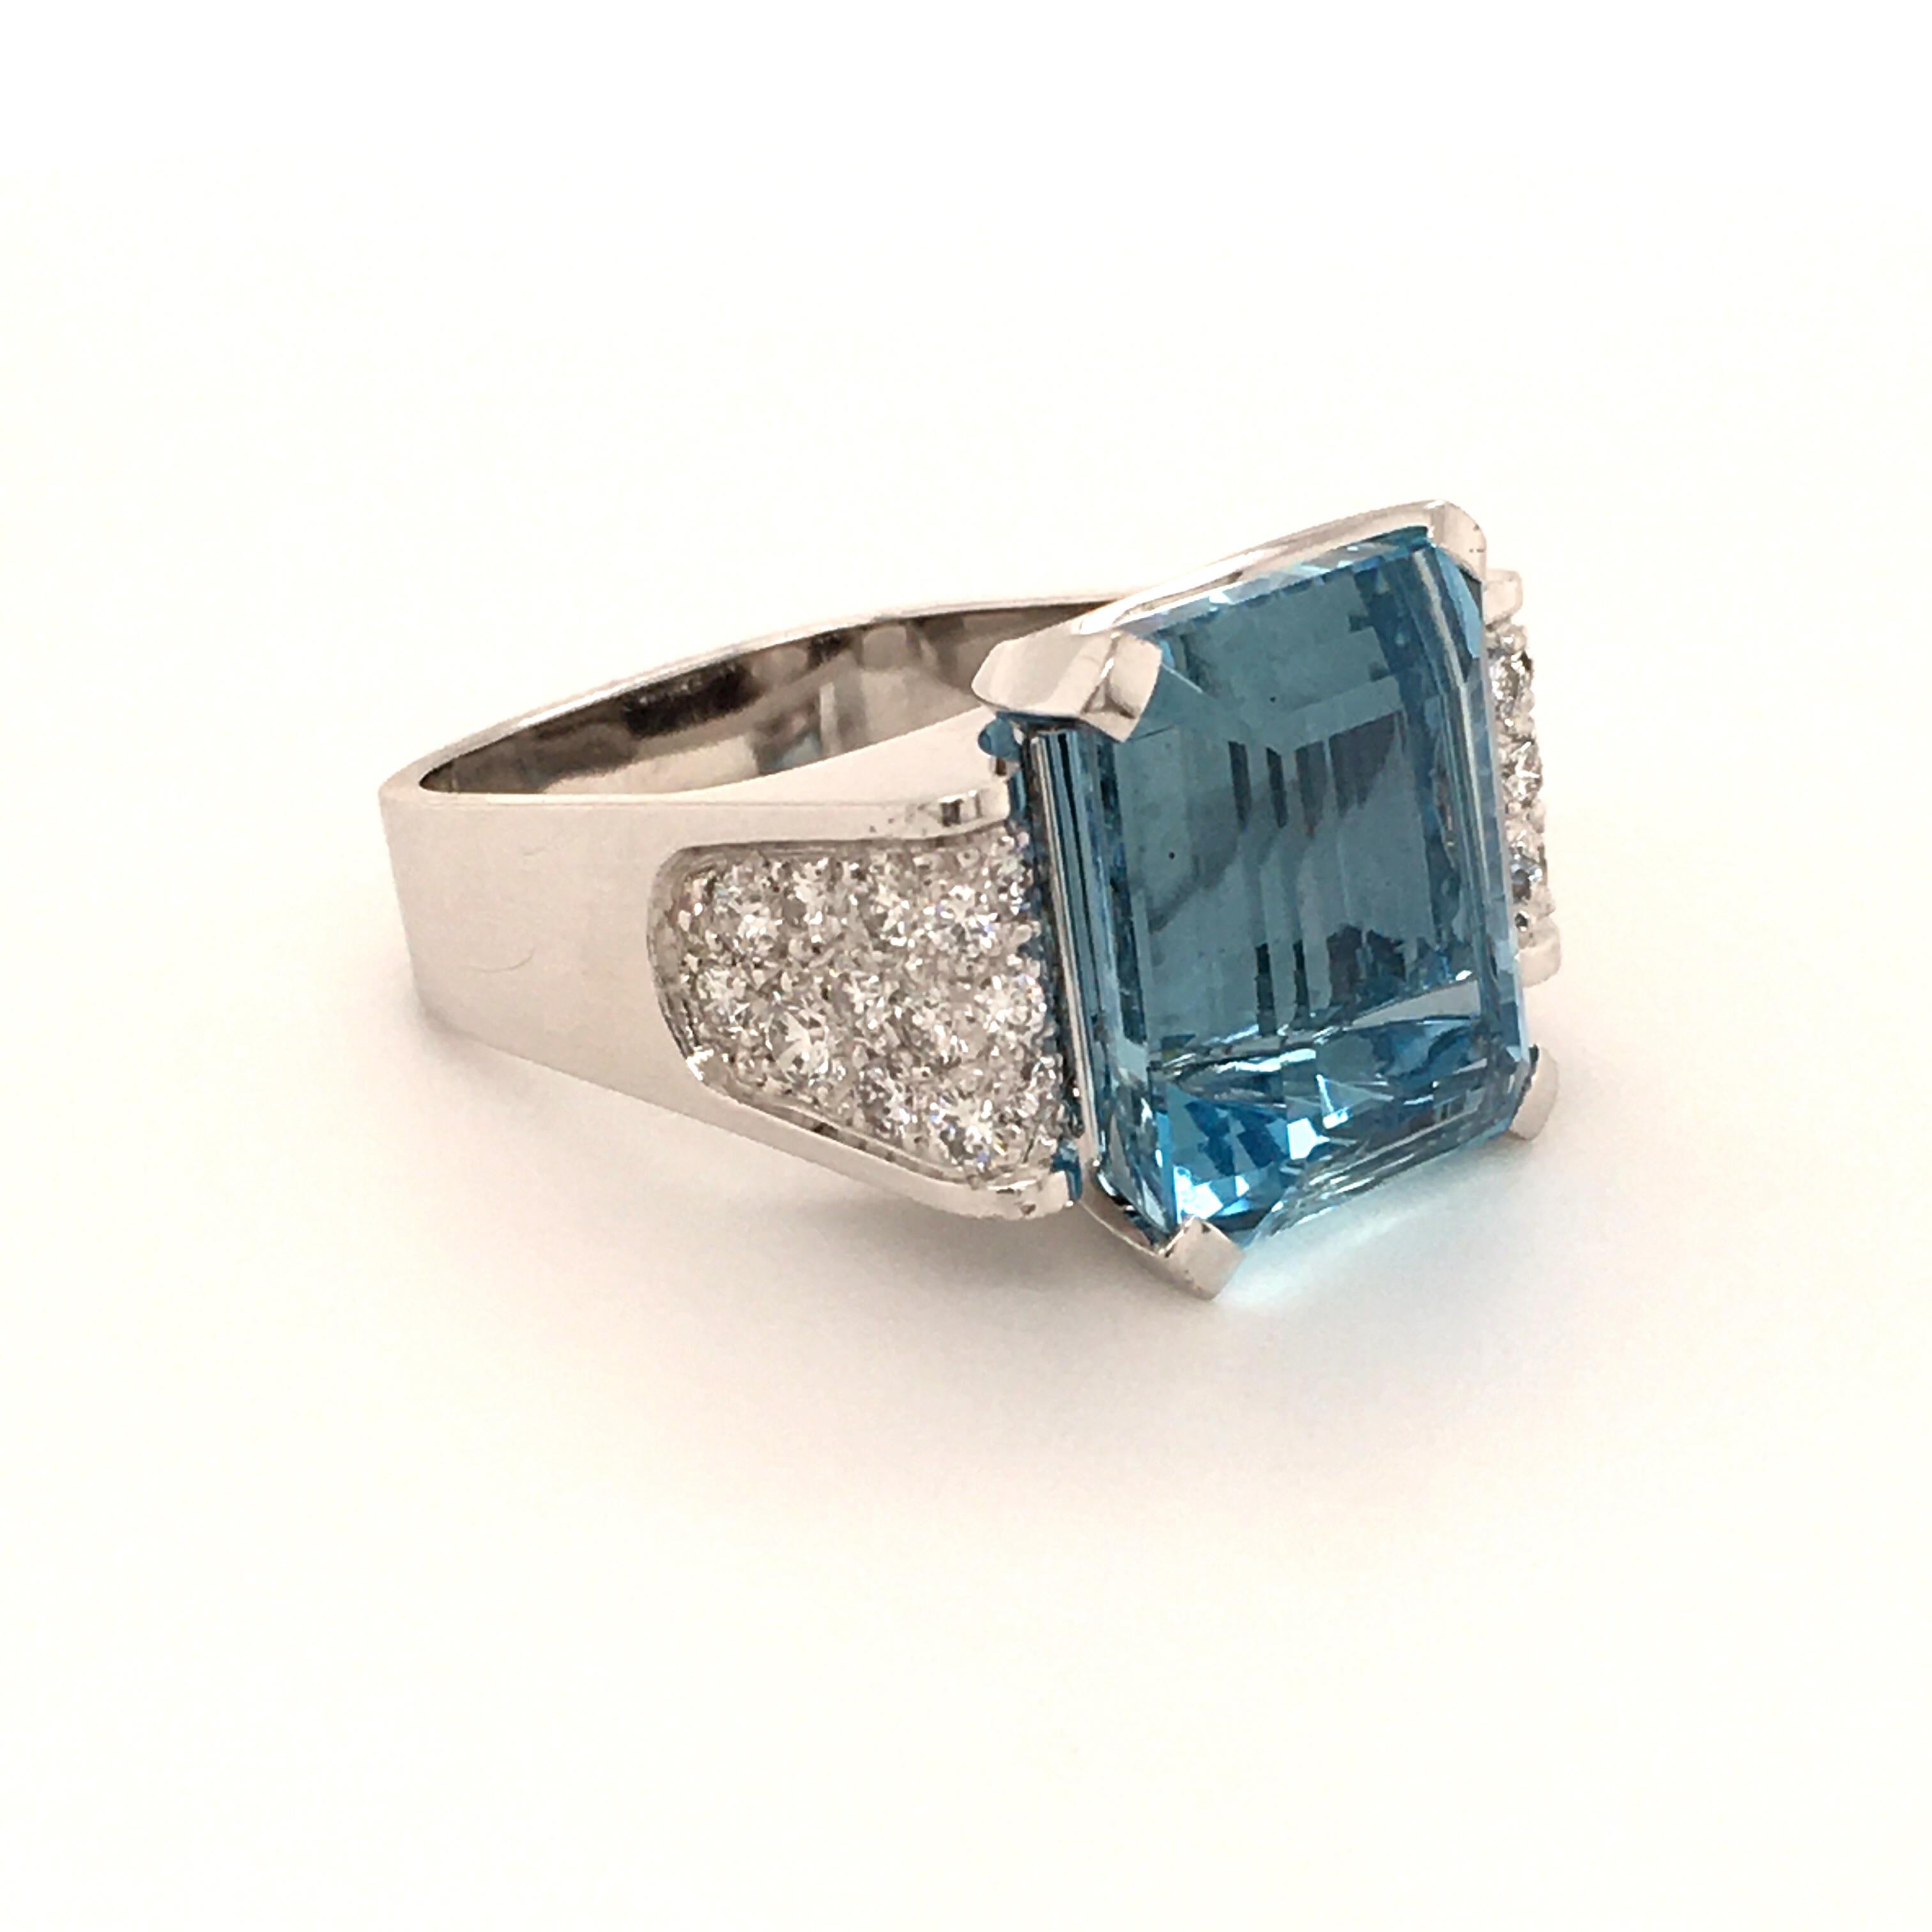 Timeless 18 KT White Gold Ring with a beautiful aquamarine of 14.90 ct, octagonal faceted. Further set with 34 brilliant-cut diamonds tot. 1.21 ct. 

Ring Size: 56 / US 7.5

